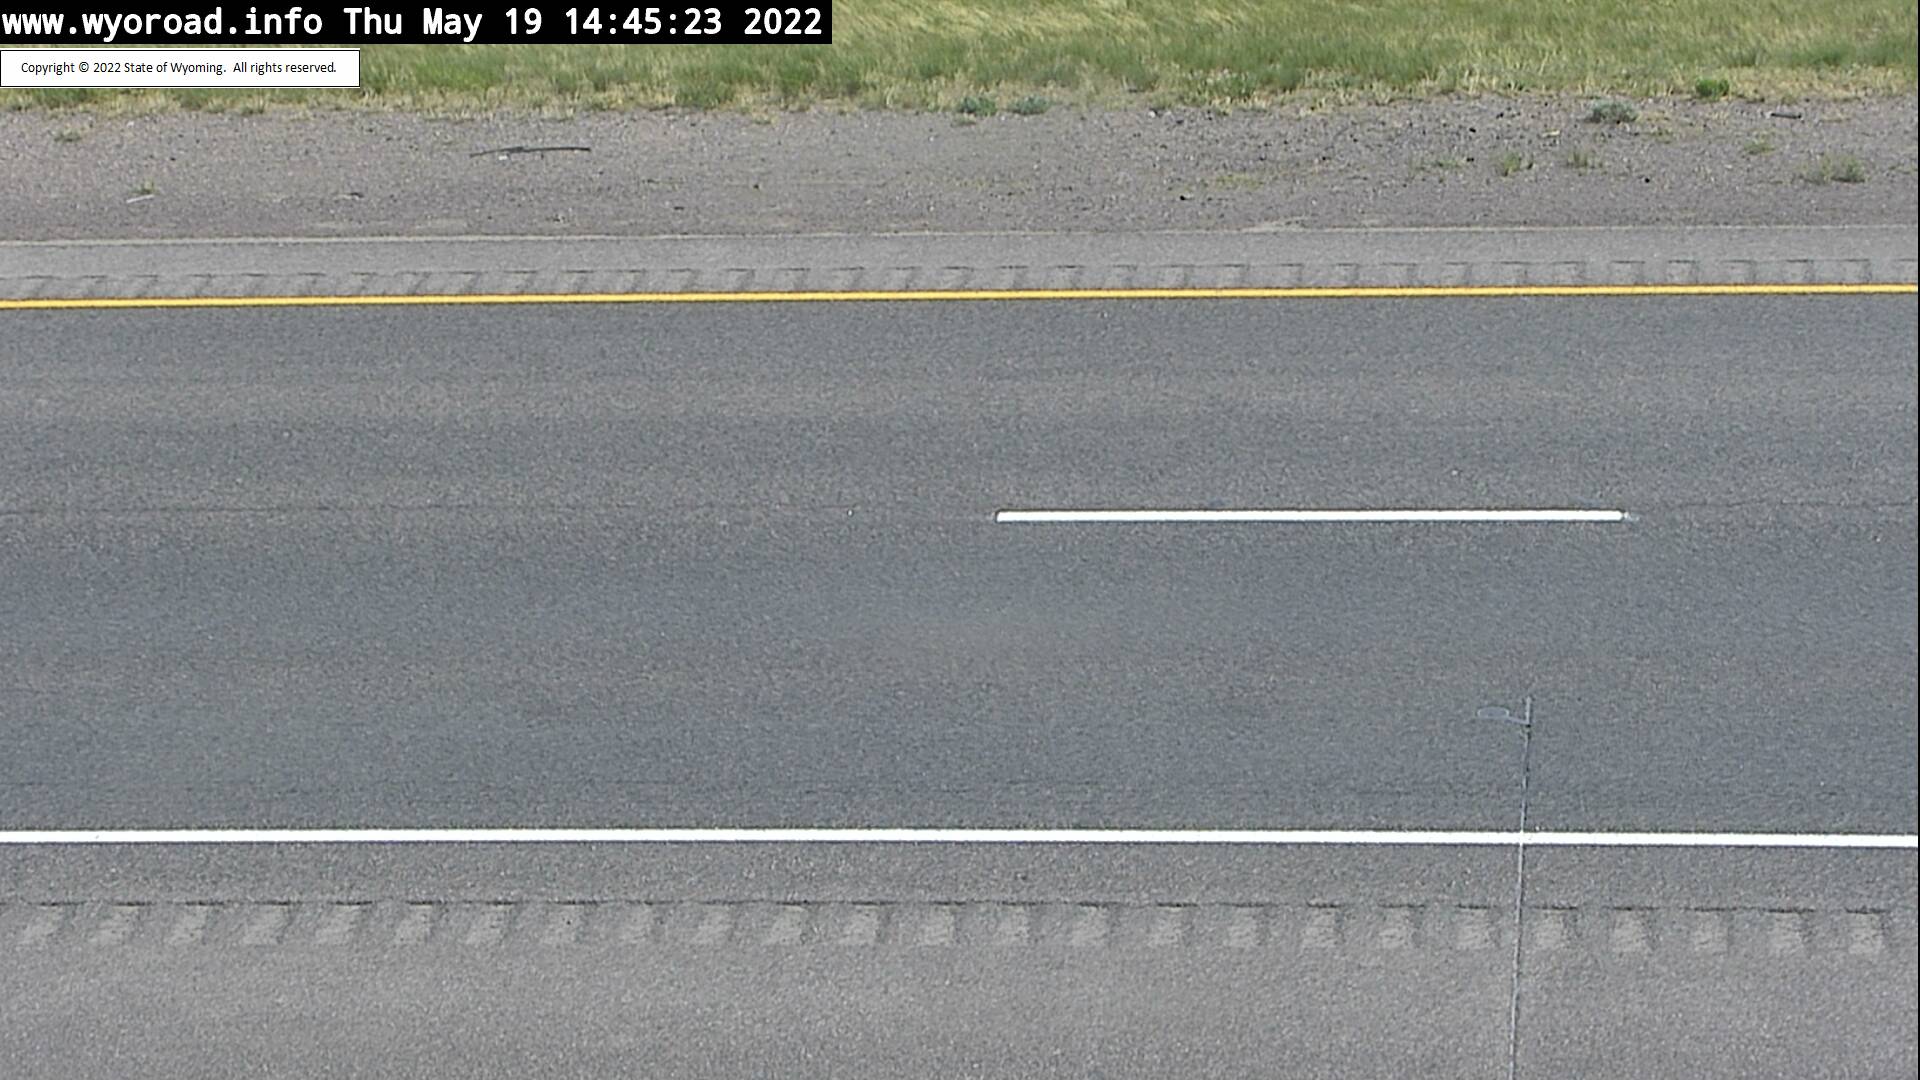 MP 353.0 - [I-80 MM353 Road Surface] - Wyoming